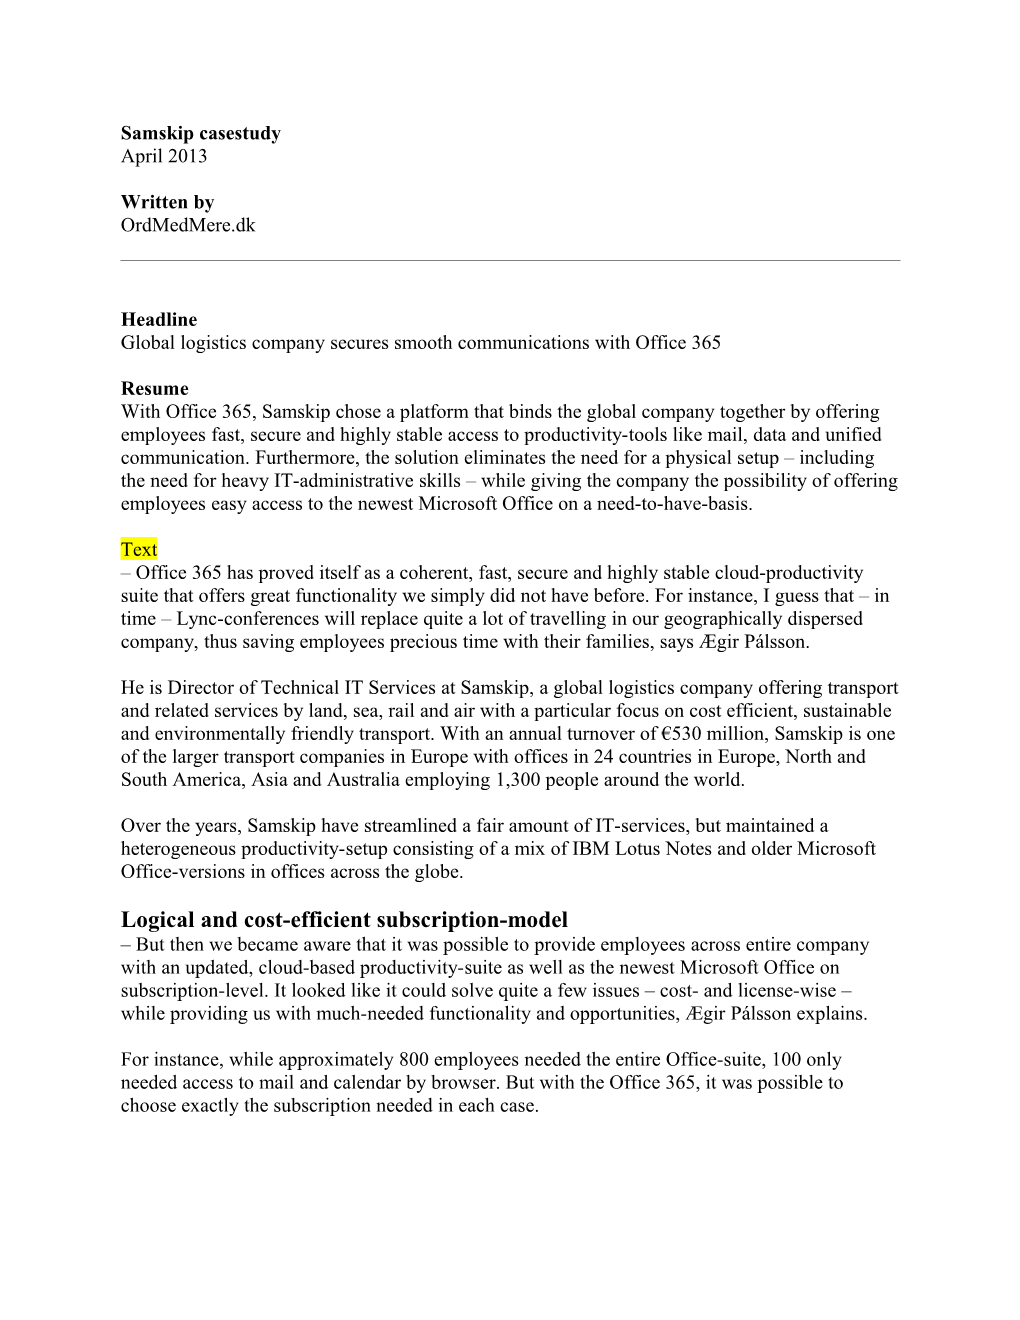 Case Study Draft Template, Updated October 2004